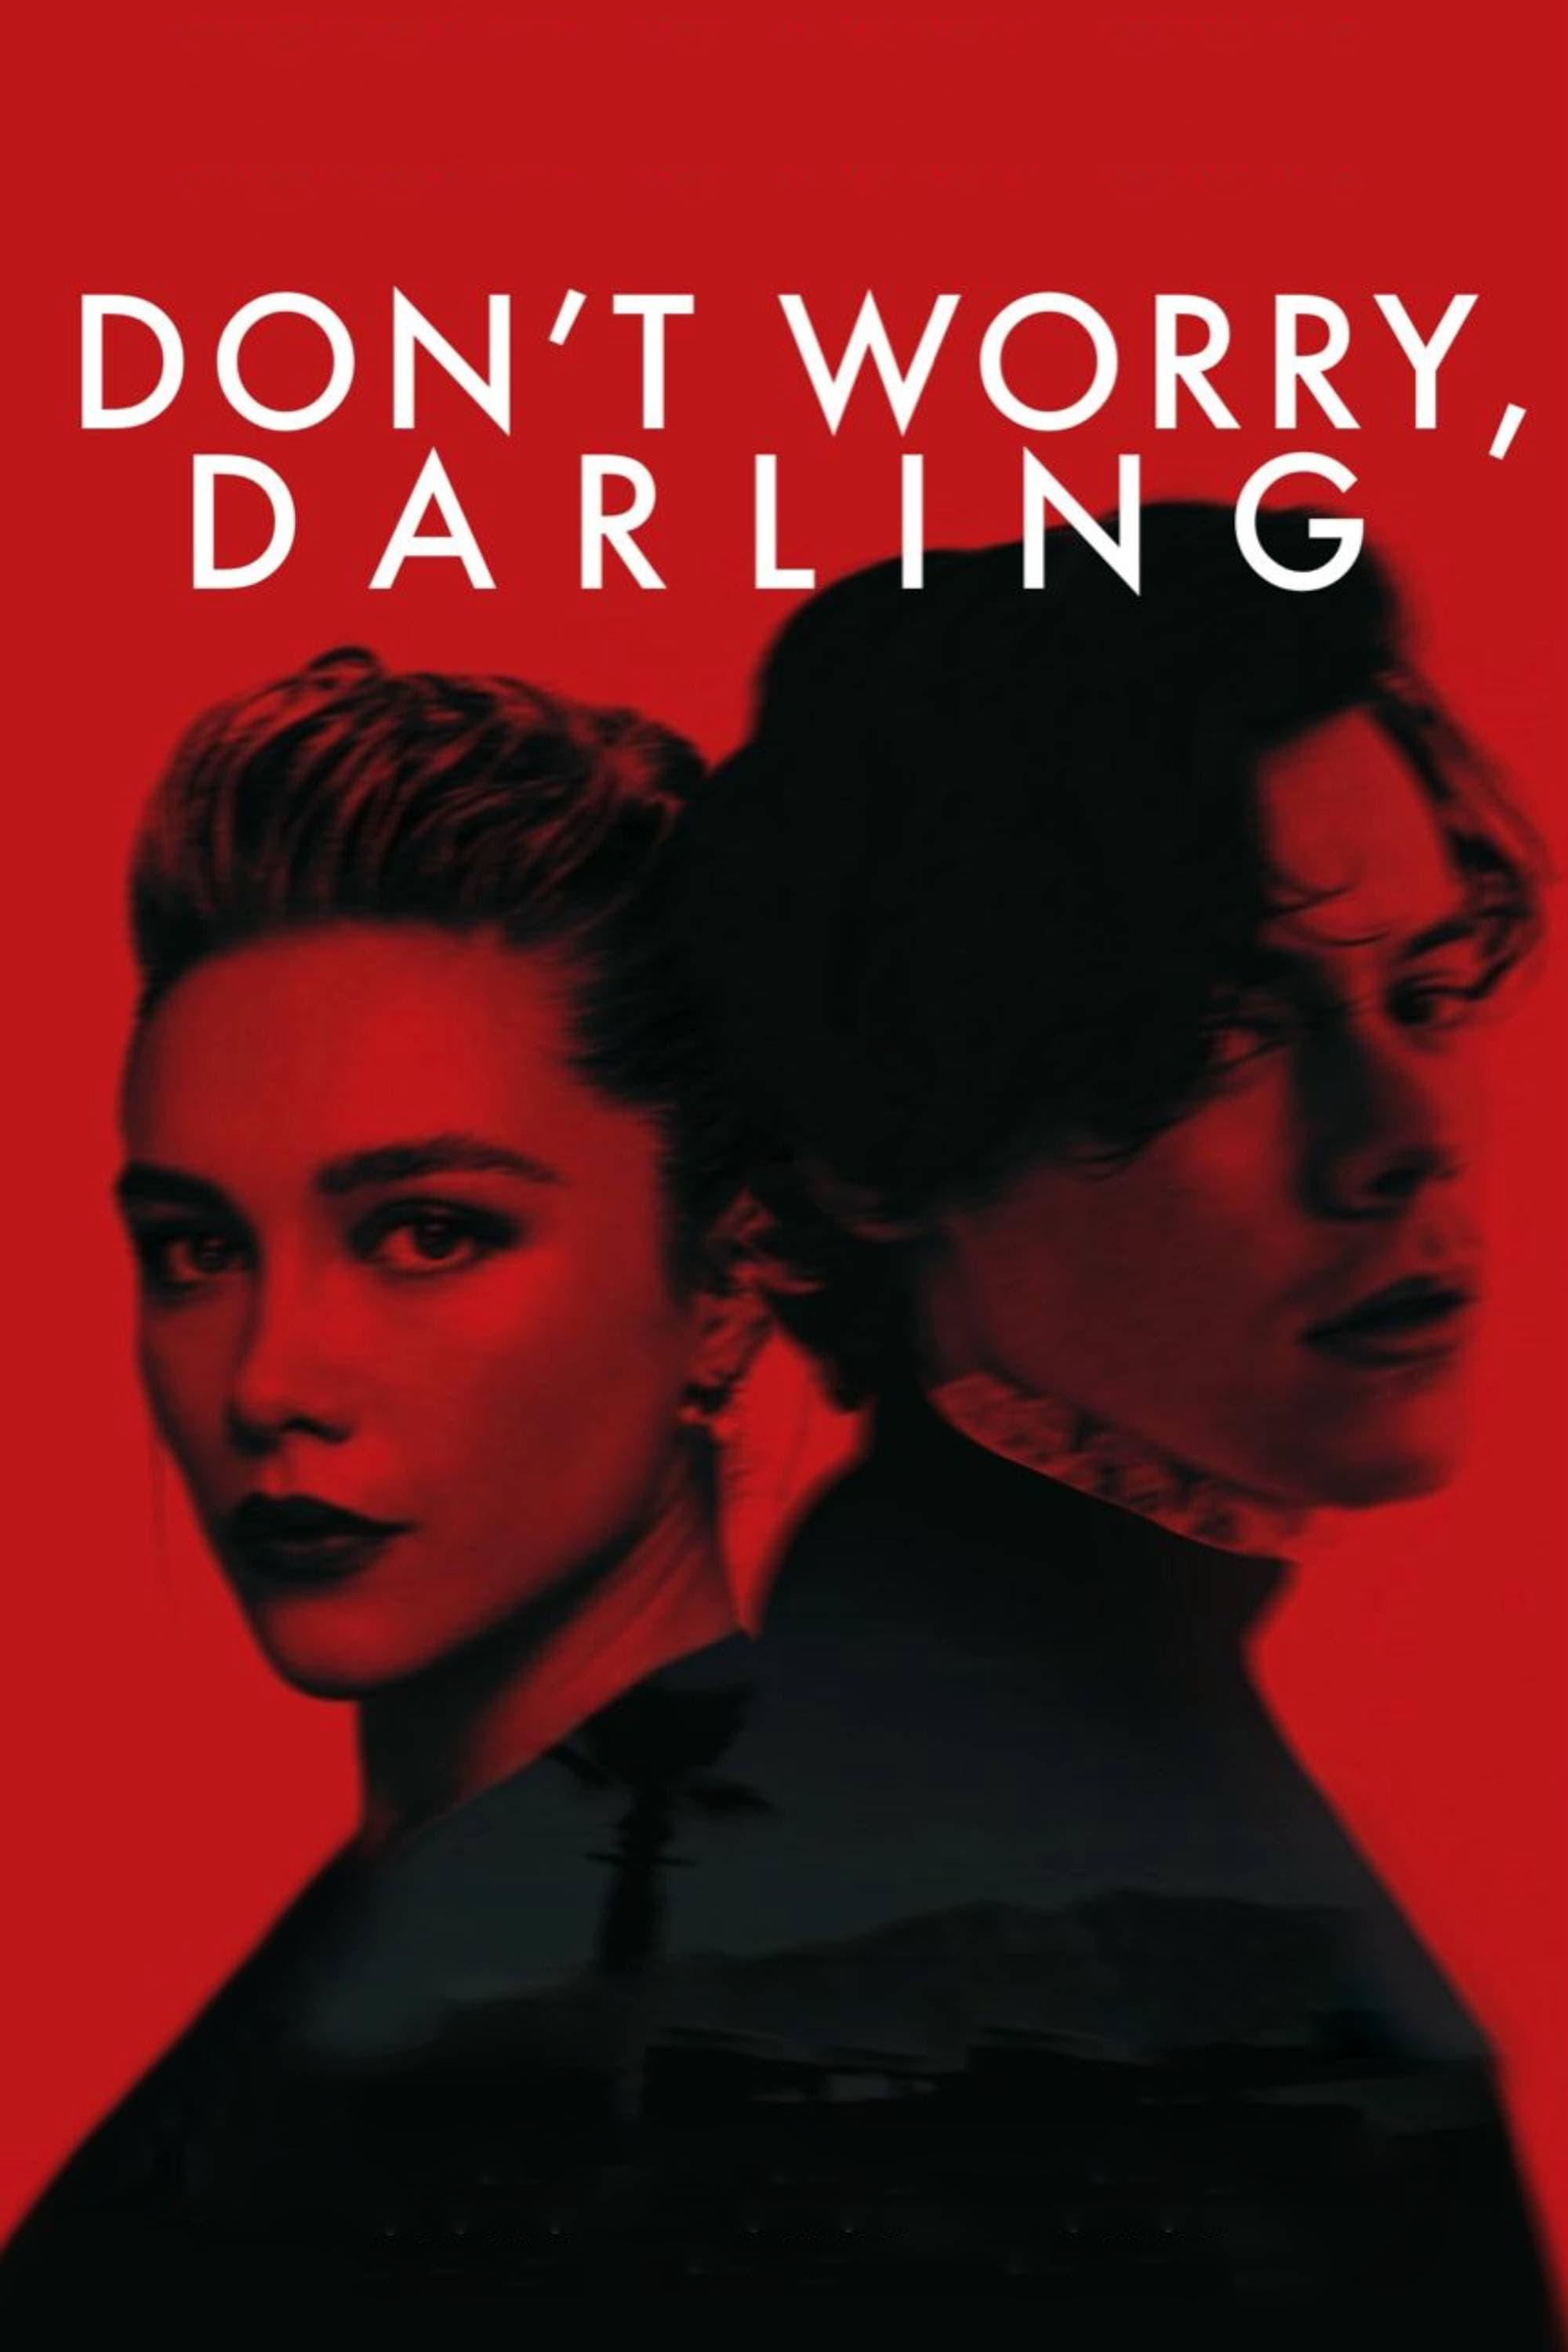 Don't Worry, Darling (2022) Movie Information & Trailers